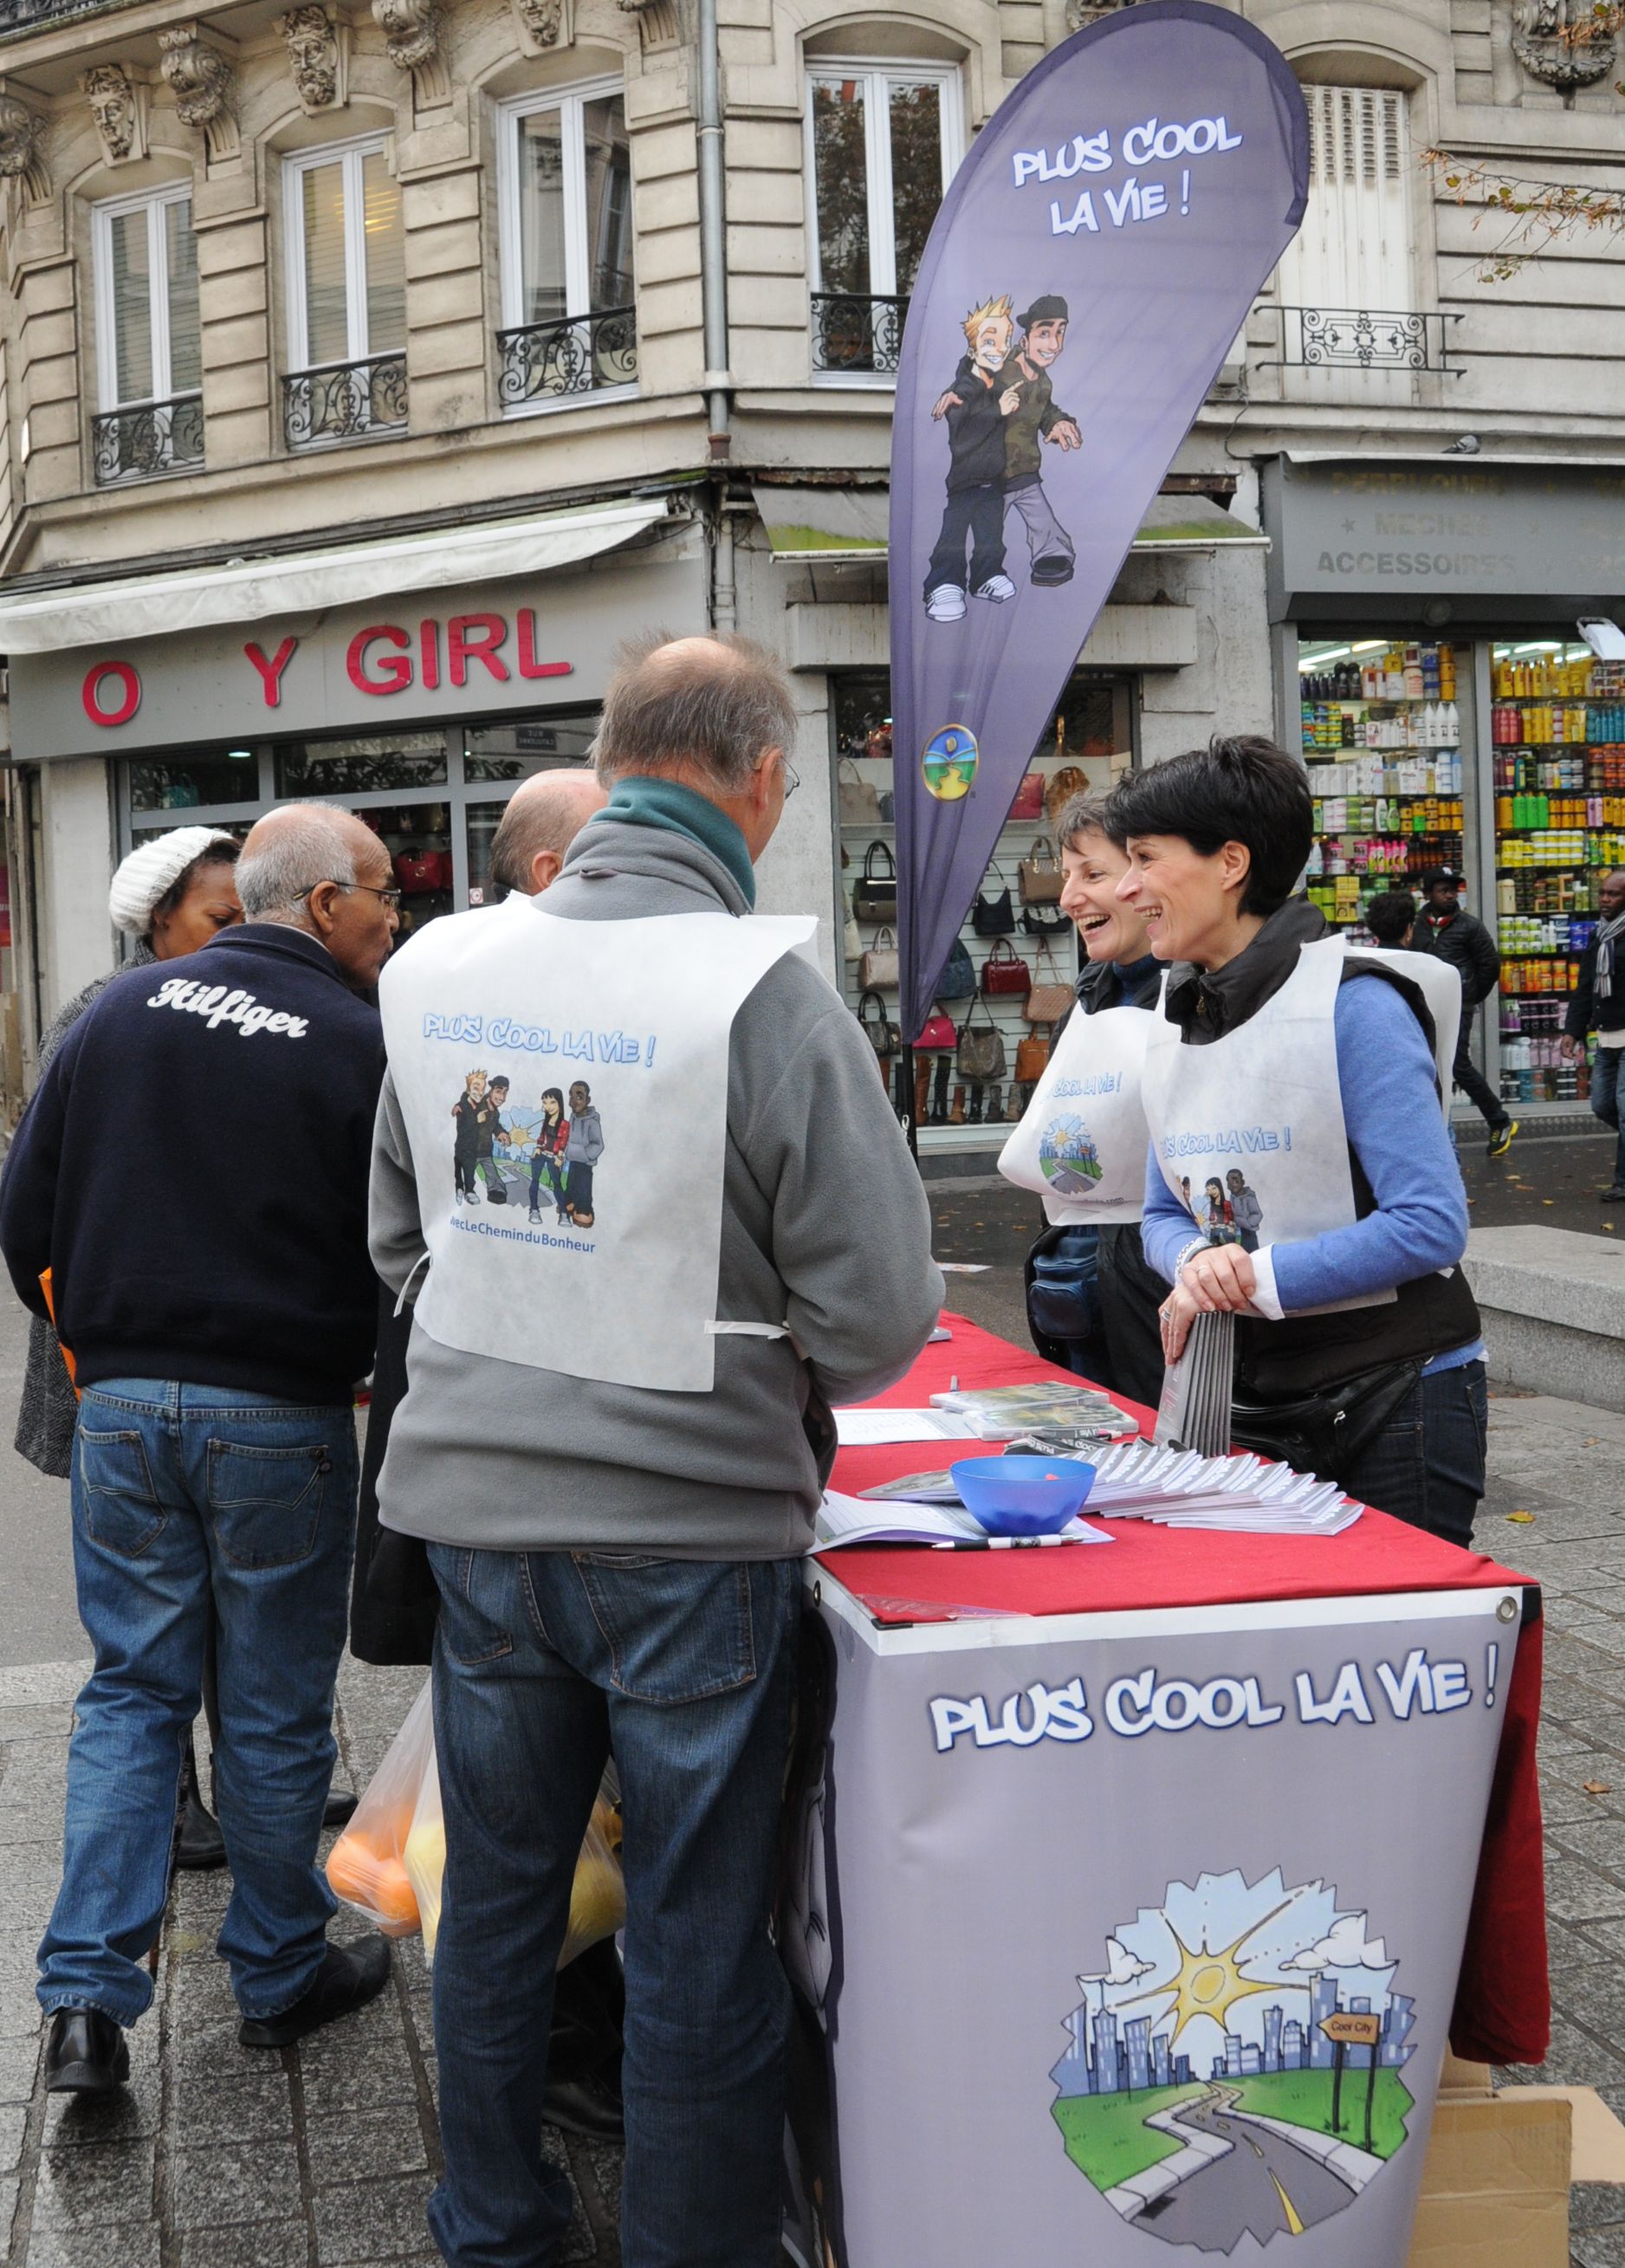 Volunteers from Scientology Churches of Paris share the message that life is “much cooler” when it is moral, at The Way to Happiness booth November 2, 2013, in the Paris suburb of St. Denis.